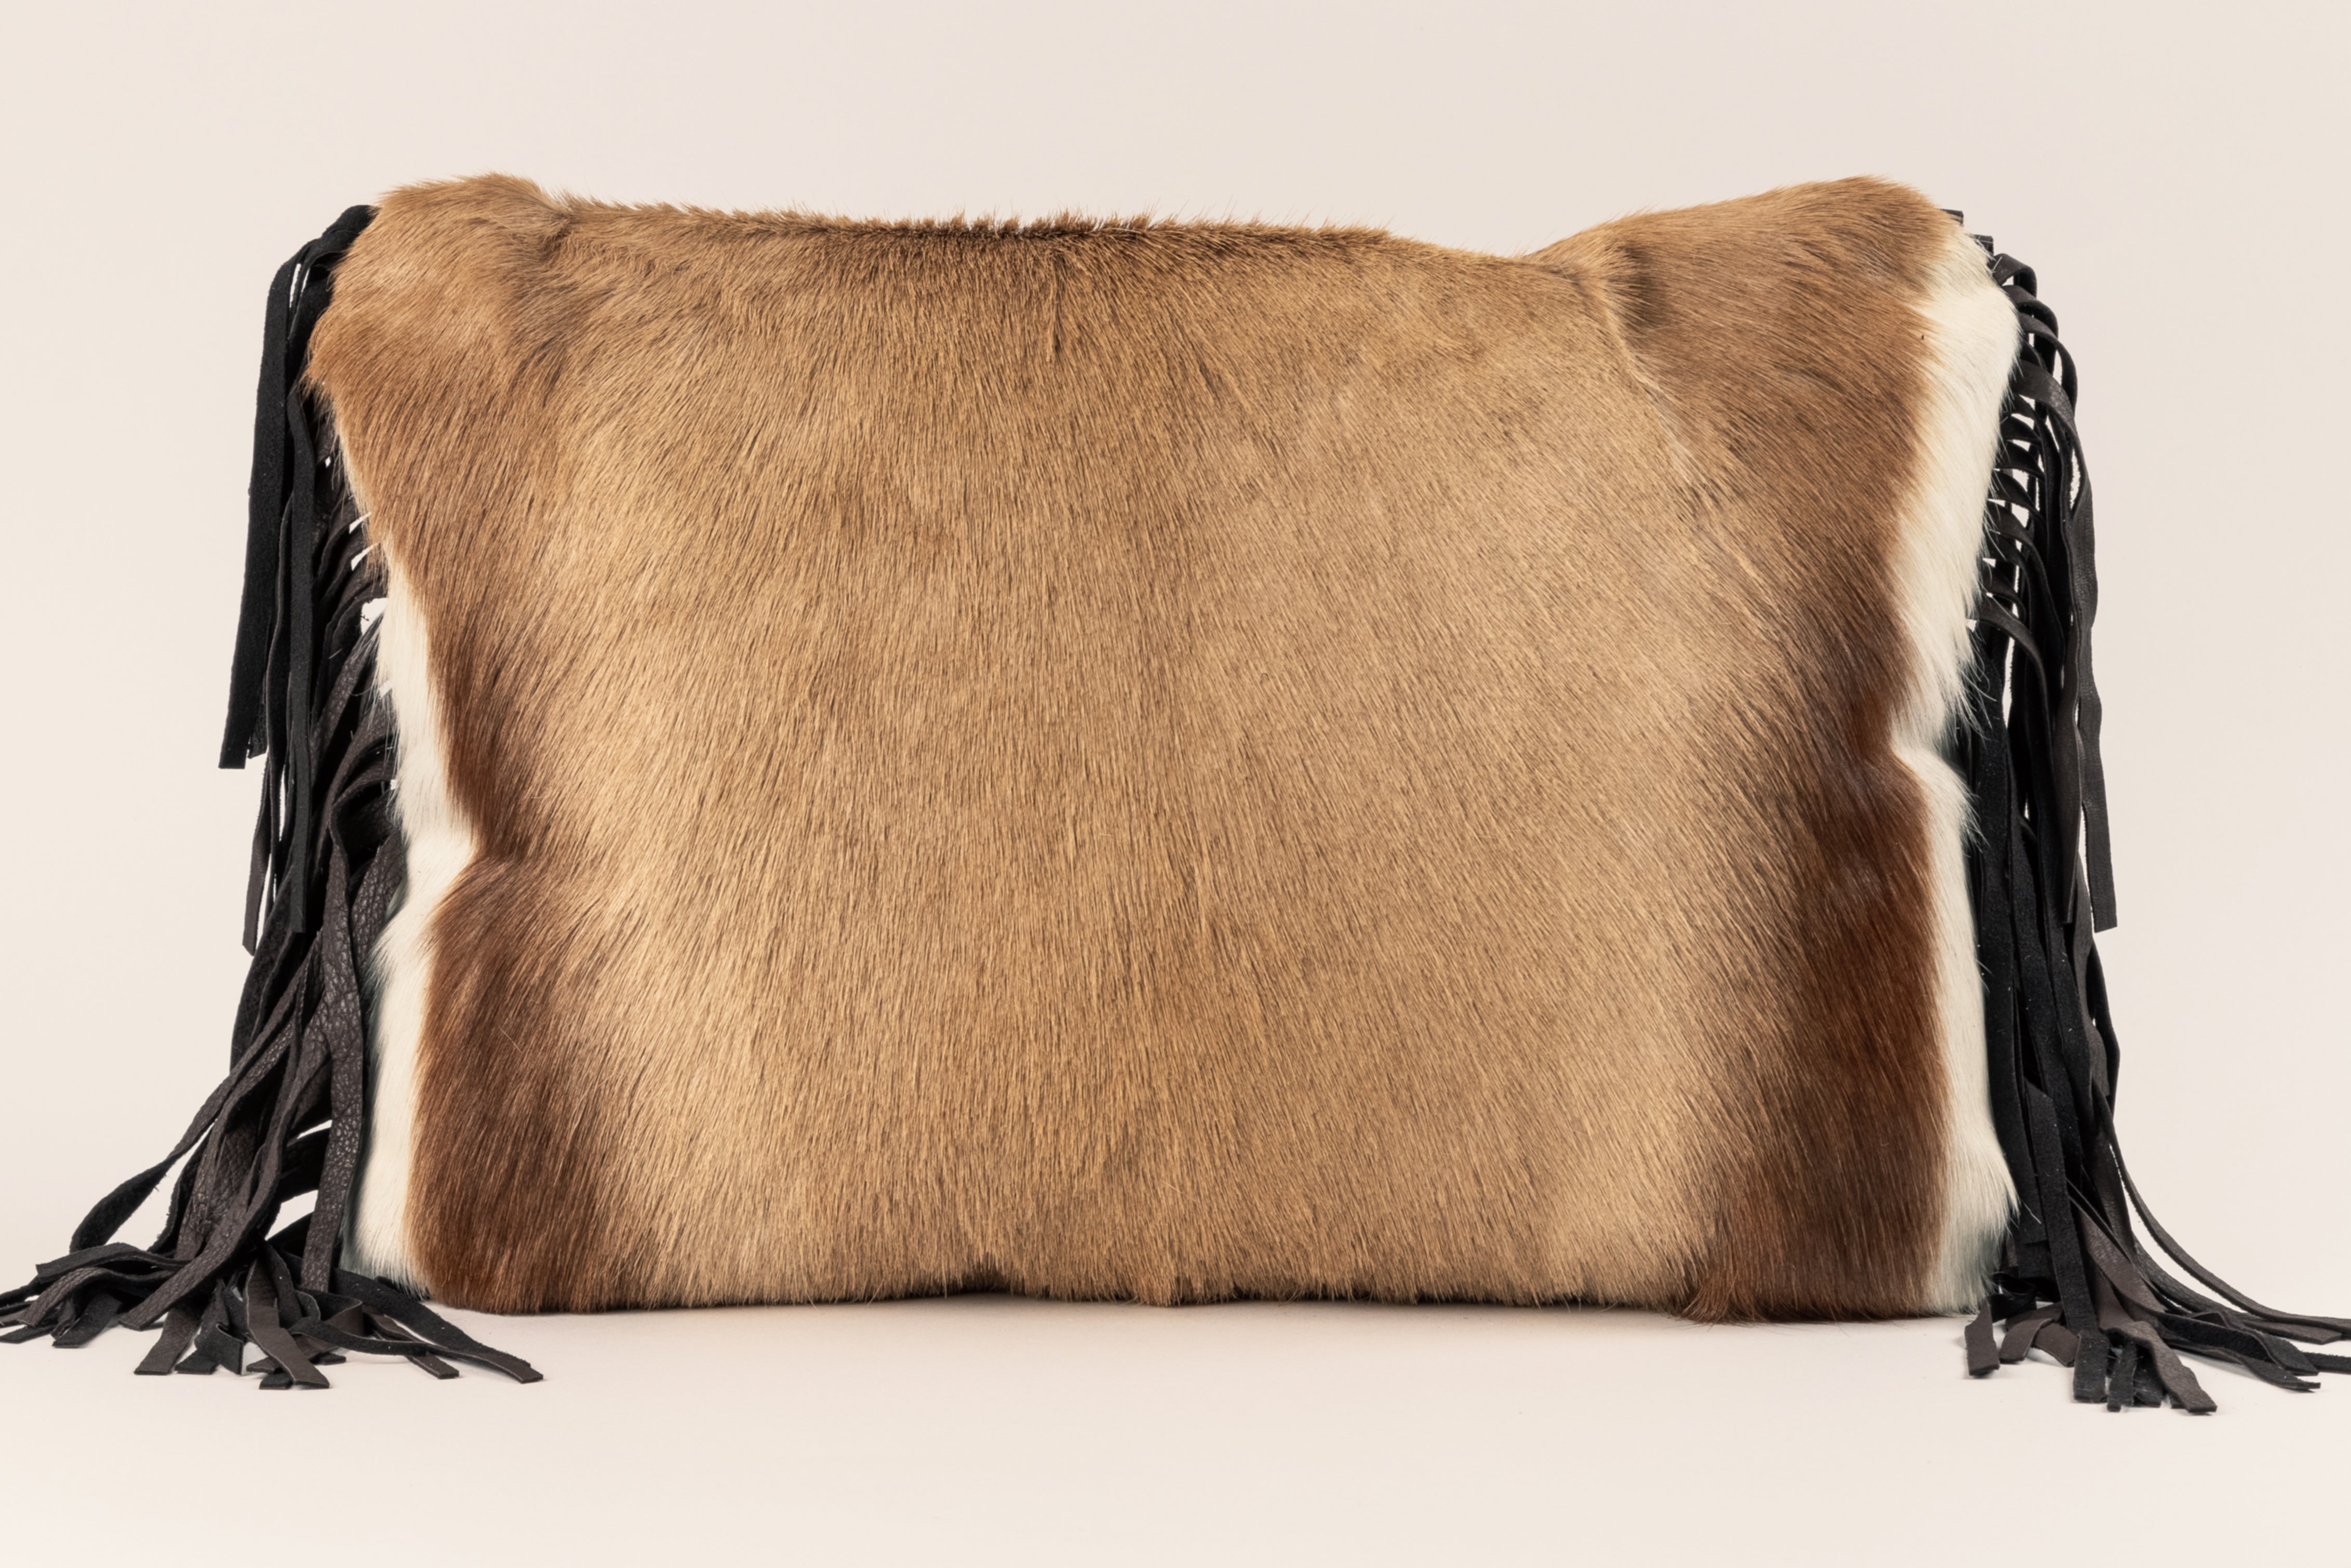 Springbok fur front with fabric back and brown fringe.